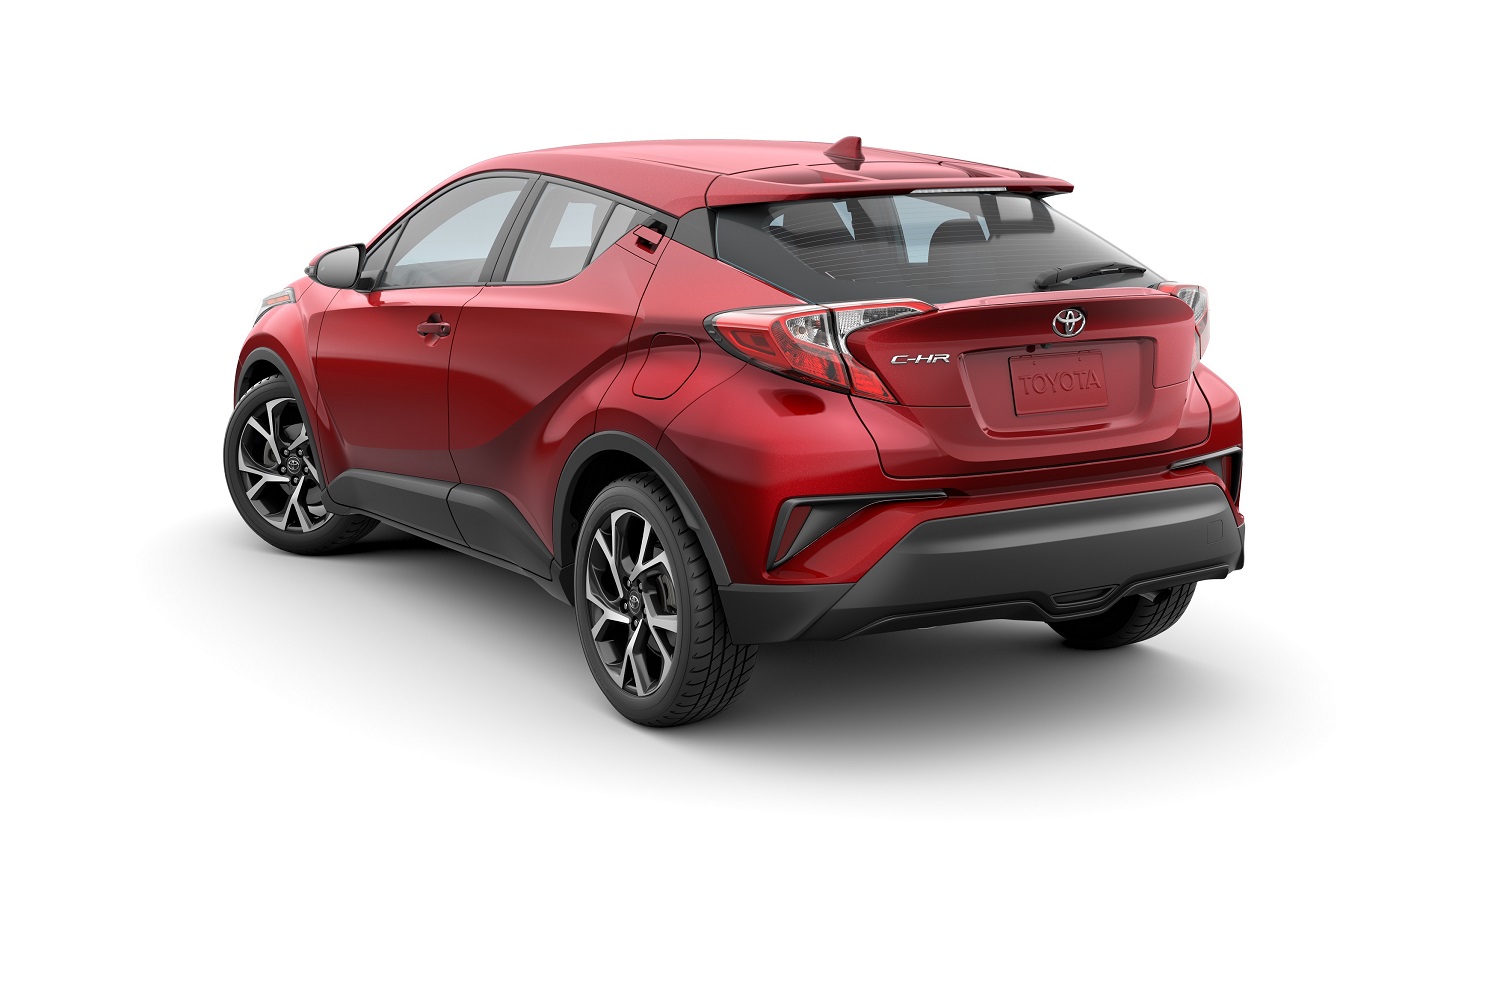 2020 toyota c hr crossover gets standard android auto compatibility chr 04